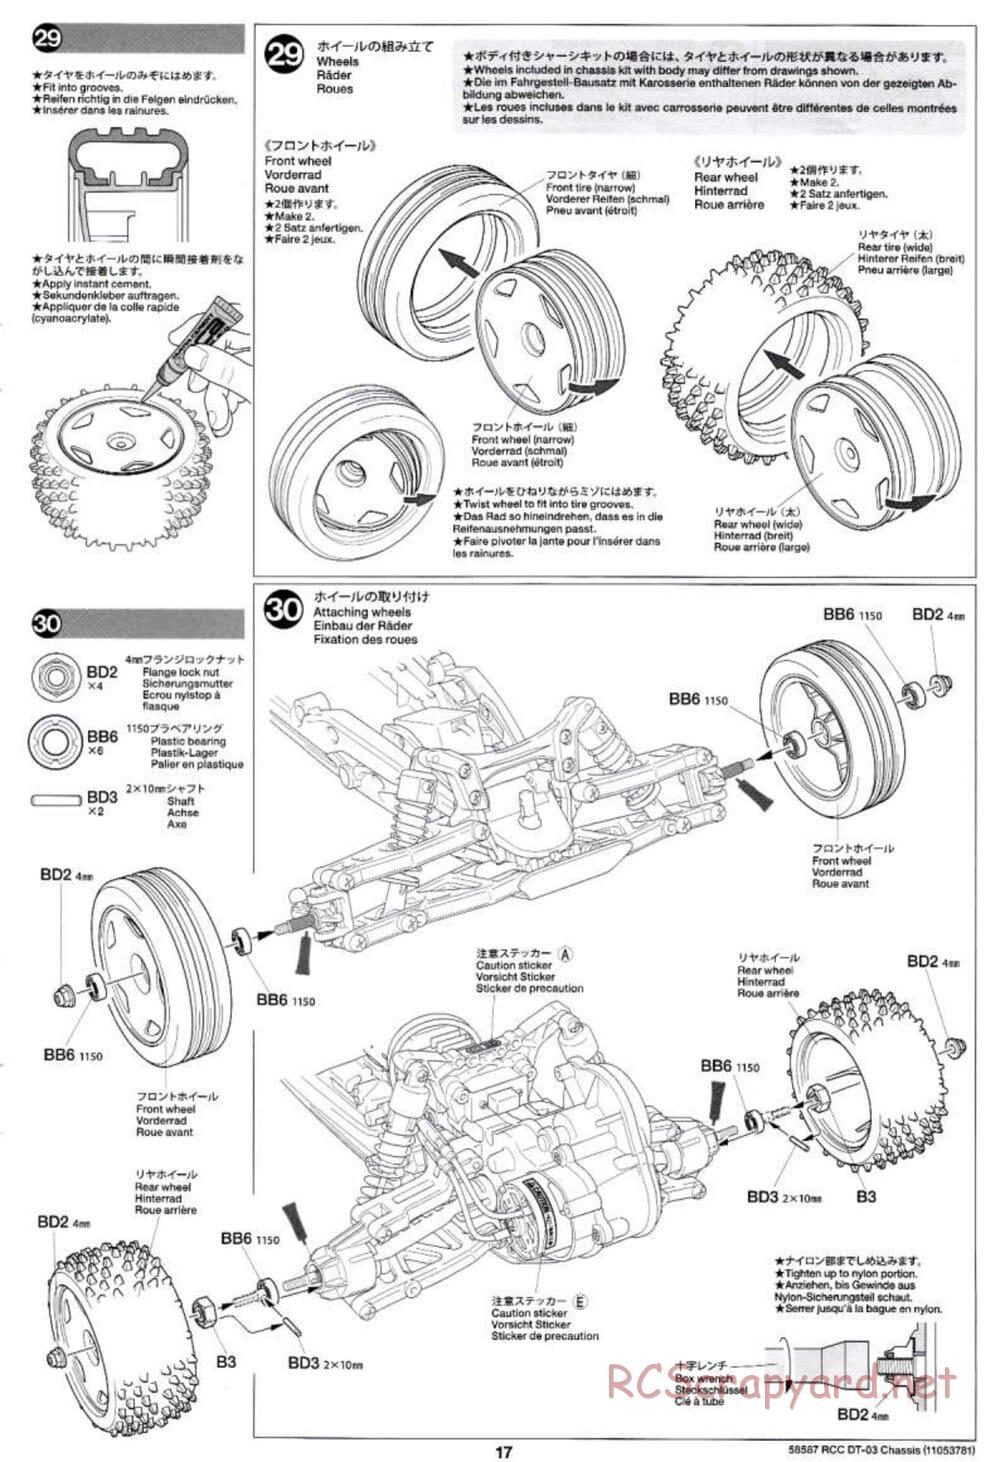 Tamiya - Neo Fighter Buggy Chassis - Manual - Page 17